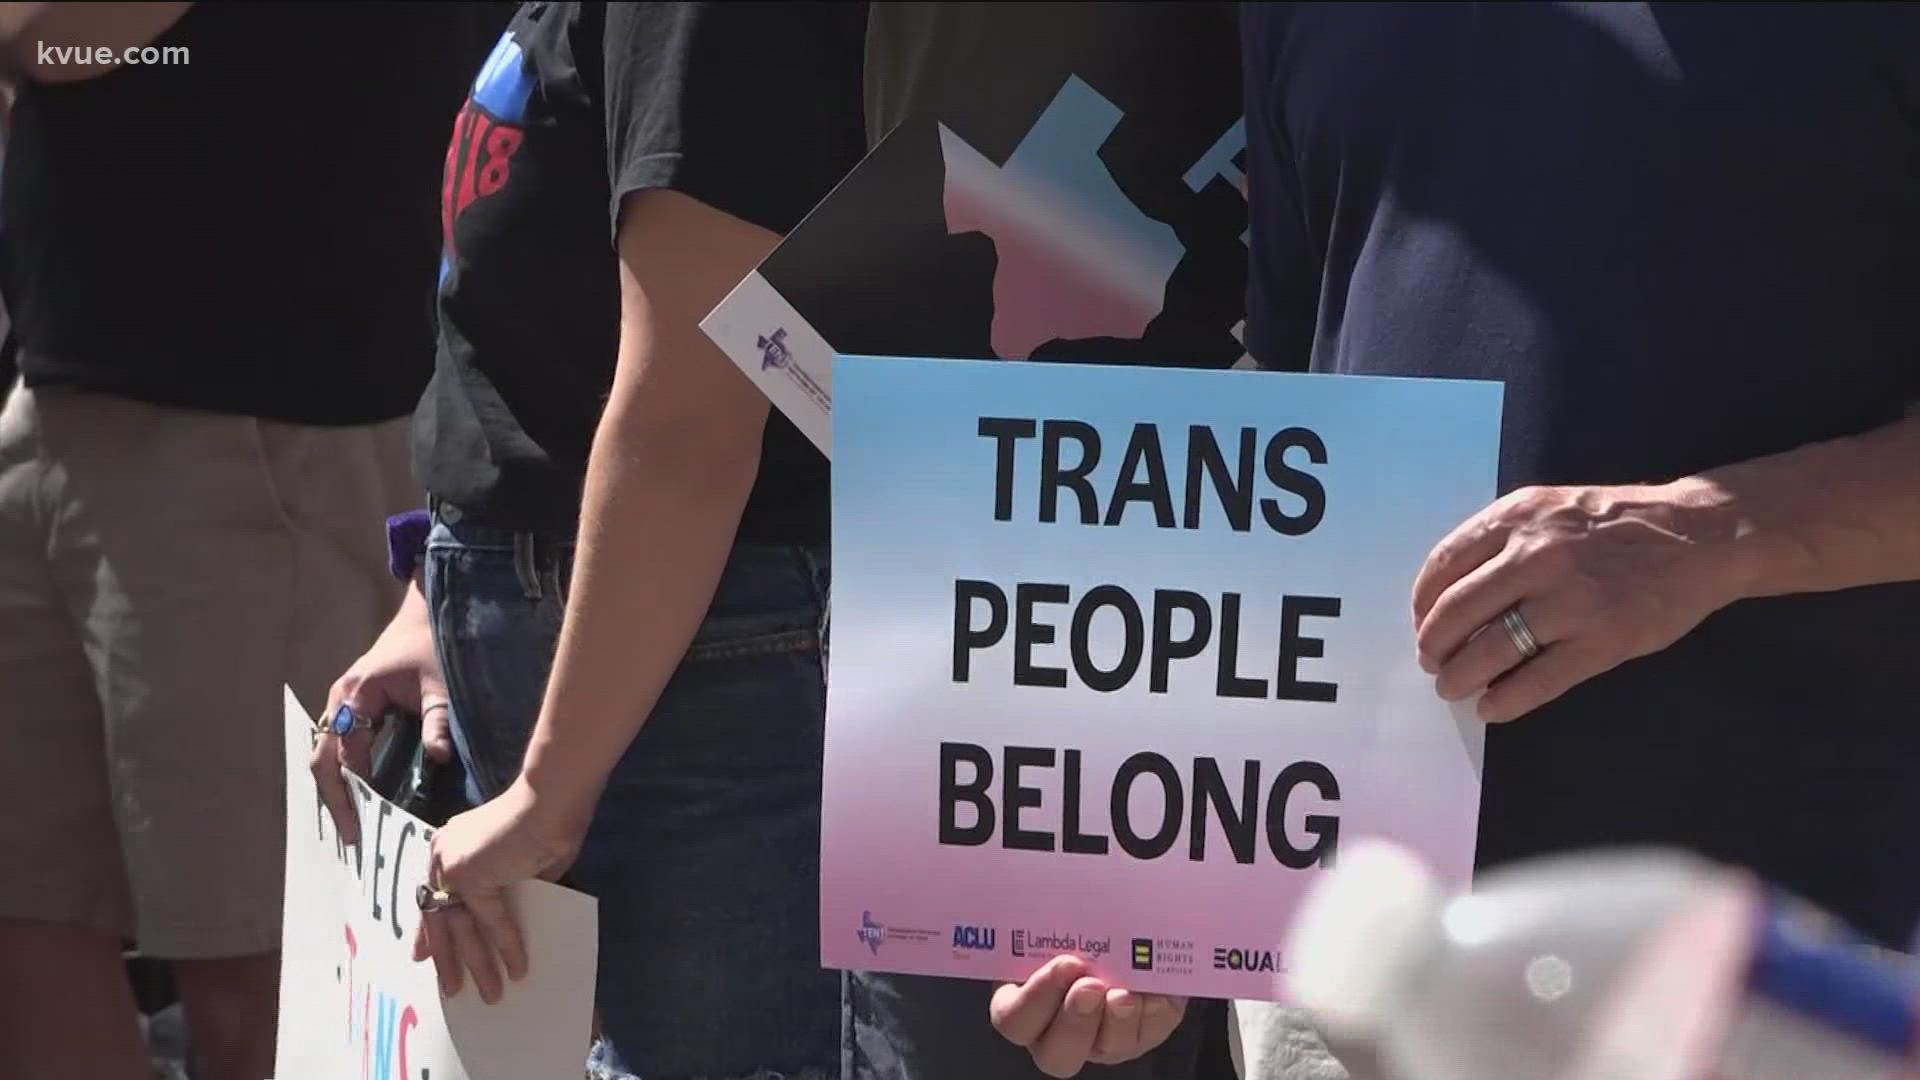 Advocates said recent attacks on the transgender community make them want to celebrate harder this year.